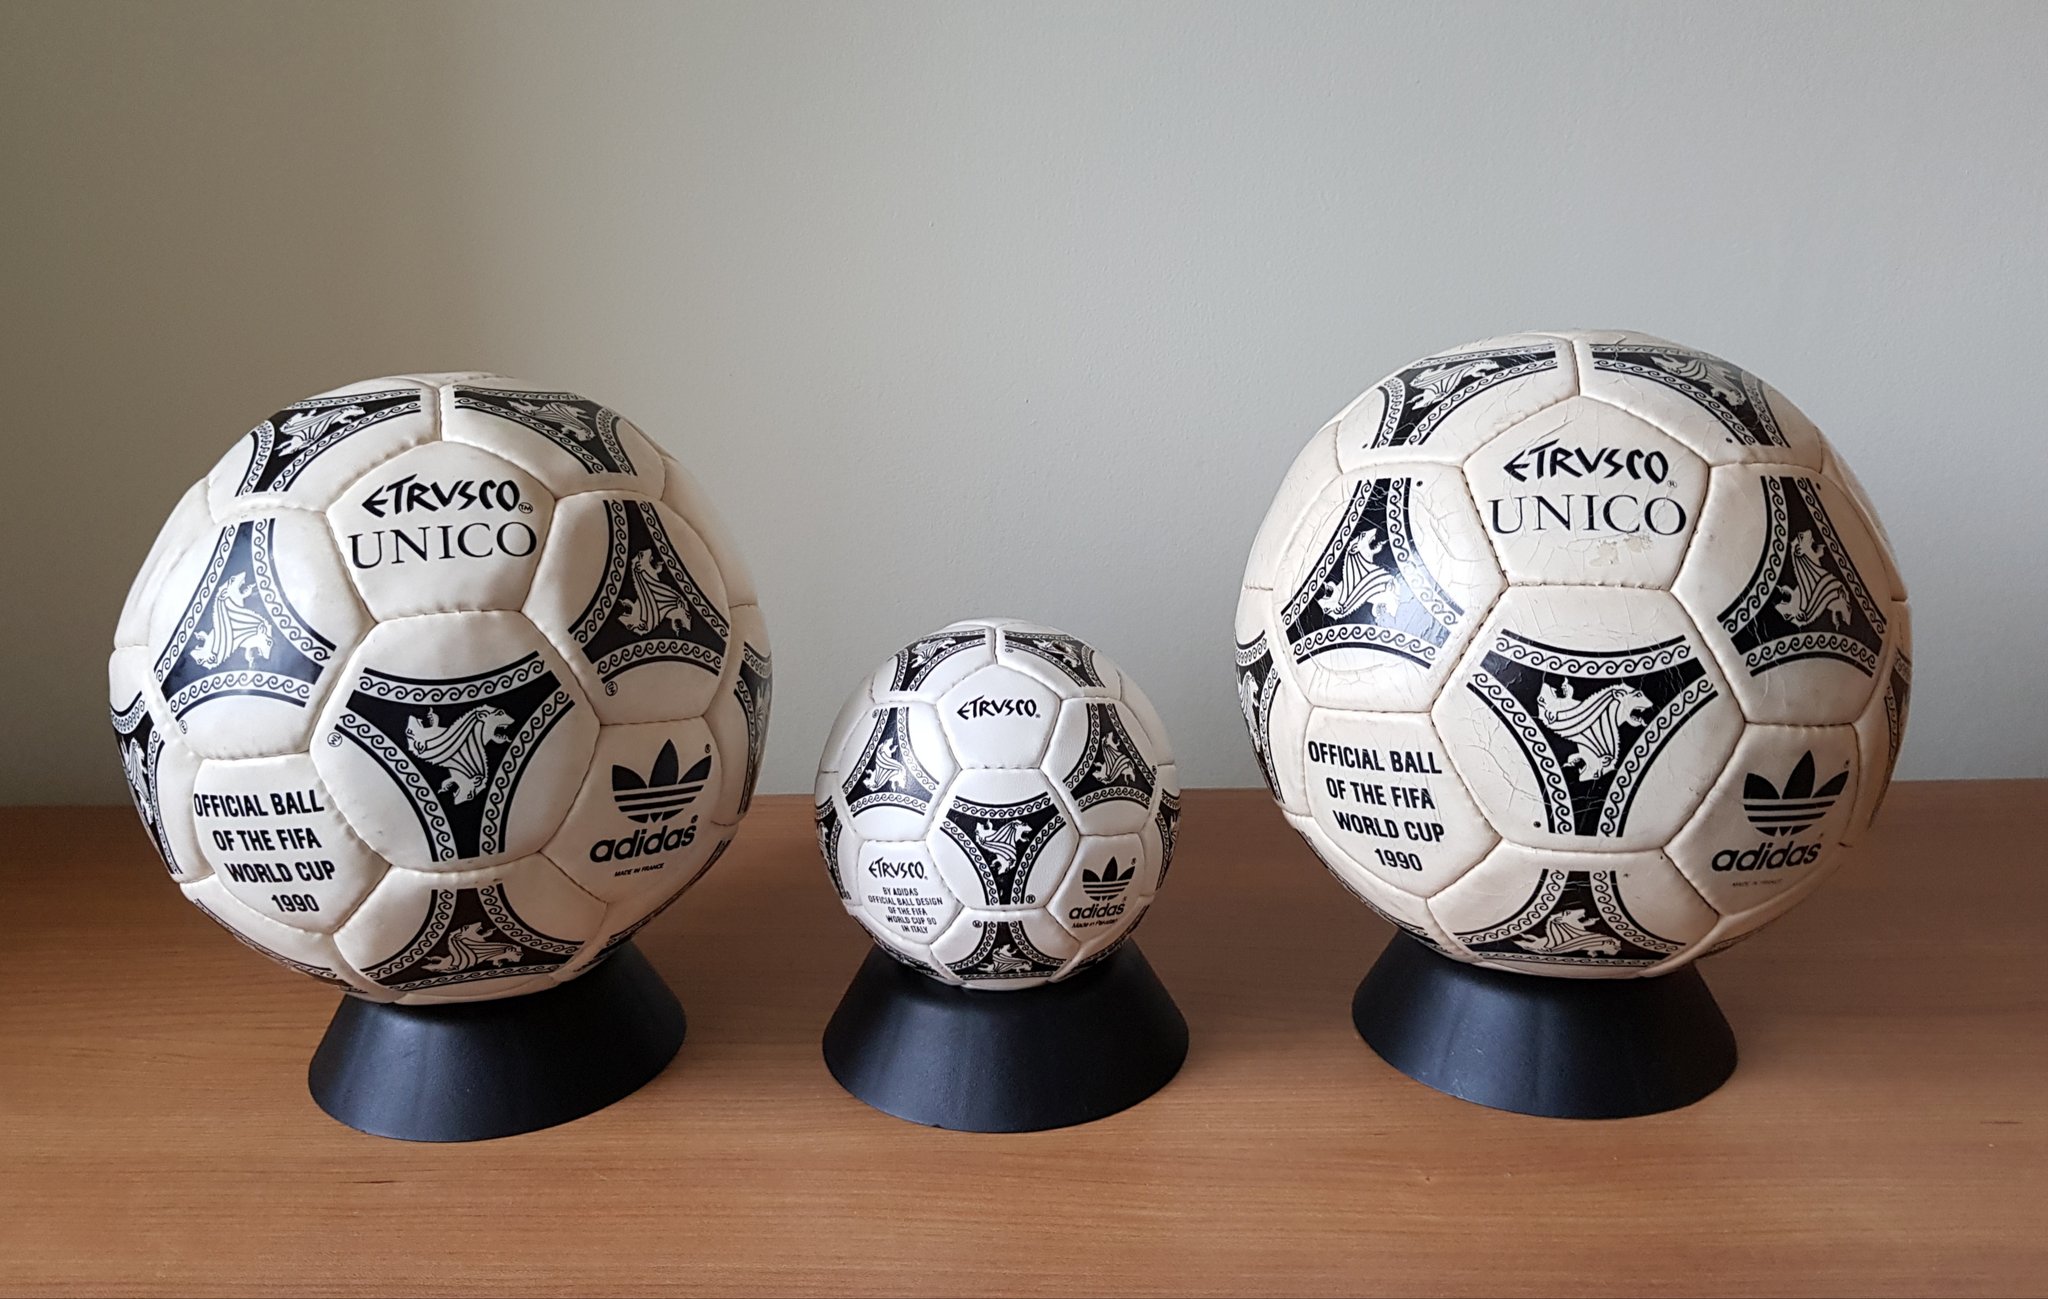 Fácil de leer máquina Viva Rob Filby on Twitter: "Adidas Etrusco - 1990 World Cup Official Match Ball  Made in France. (R) version, TM version and original mini ball #etrusco  #etruscounico #adidasetrusco #wmball #worldcupball #1990worldcup #italia90  #italy90 #